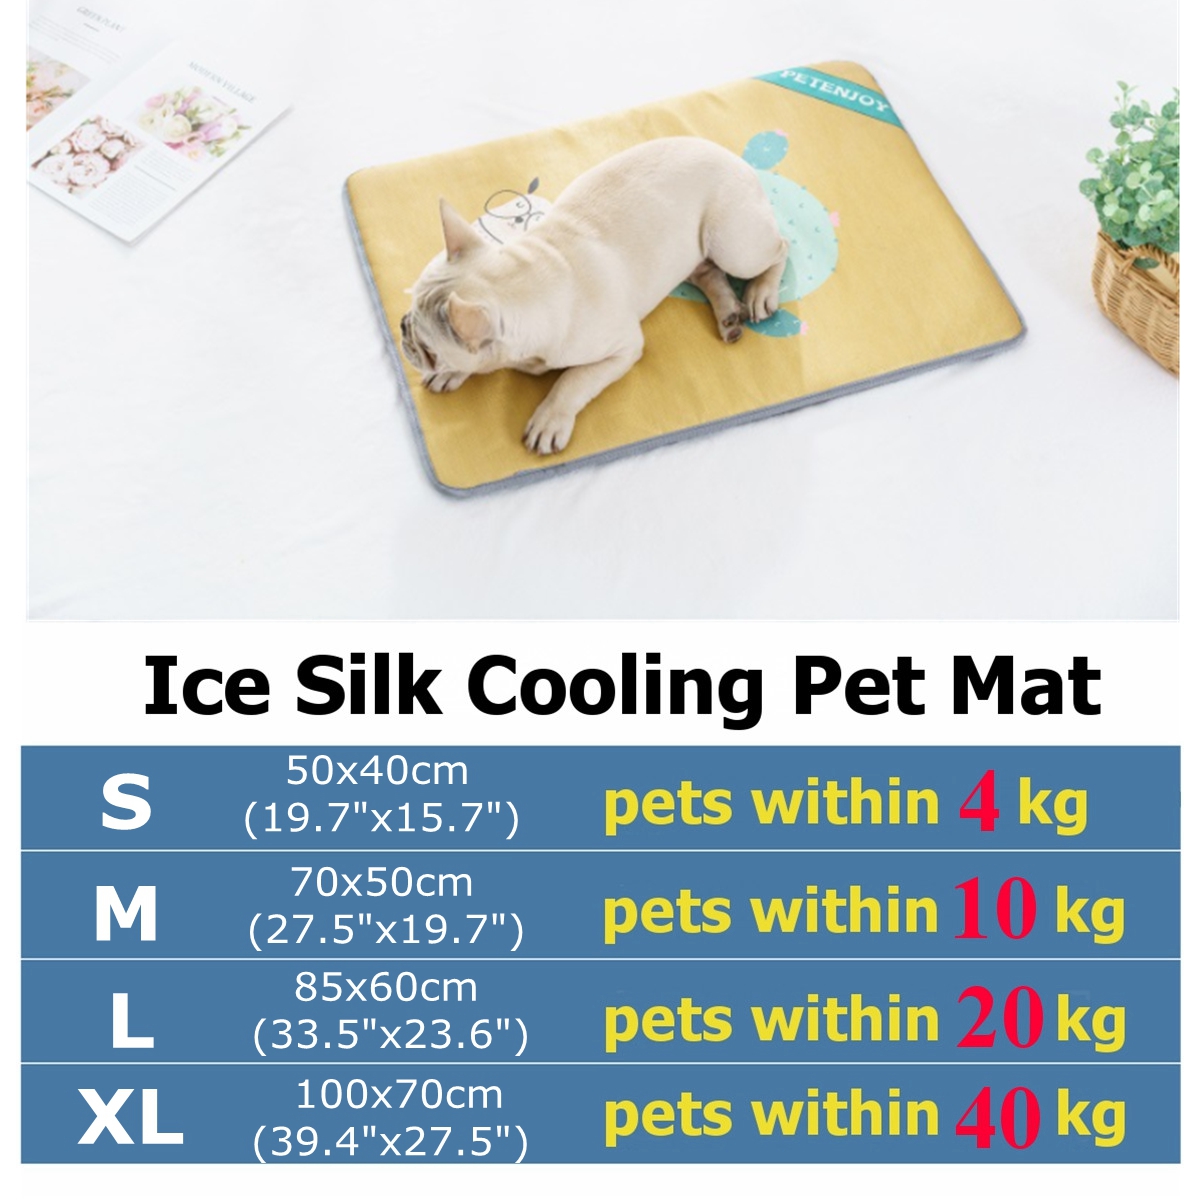 SMLXL-Ice-Silk-Summer-Cooling-Pet-Dog-Cat-Puppy-Cushion-Mat-Pad-Home-1550150-6